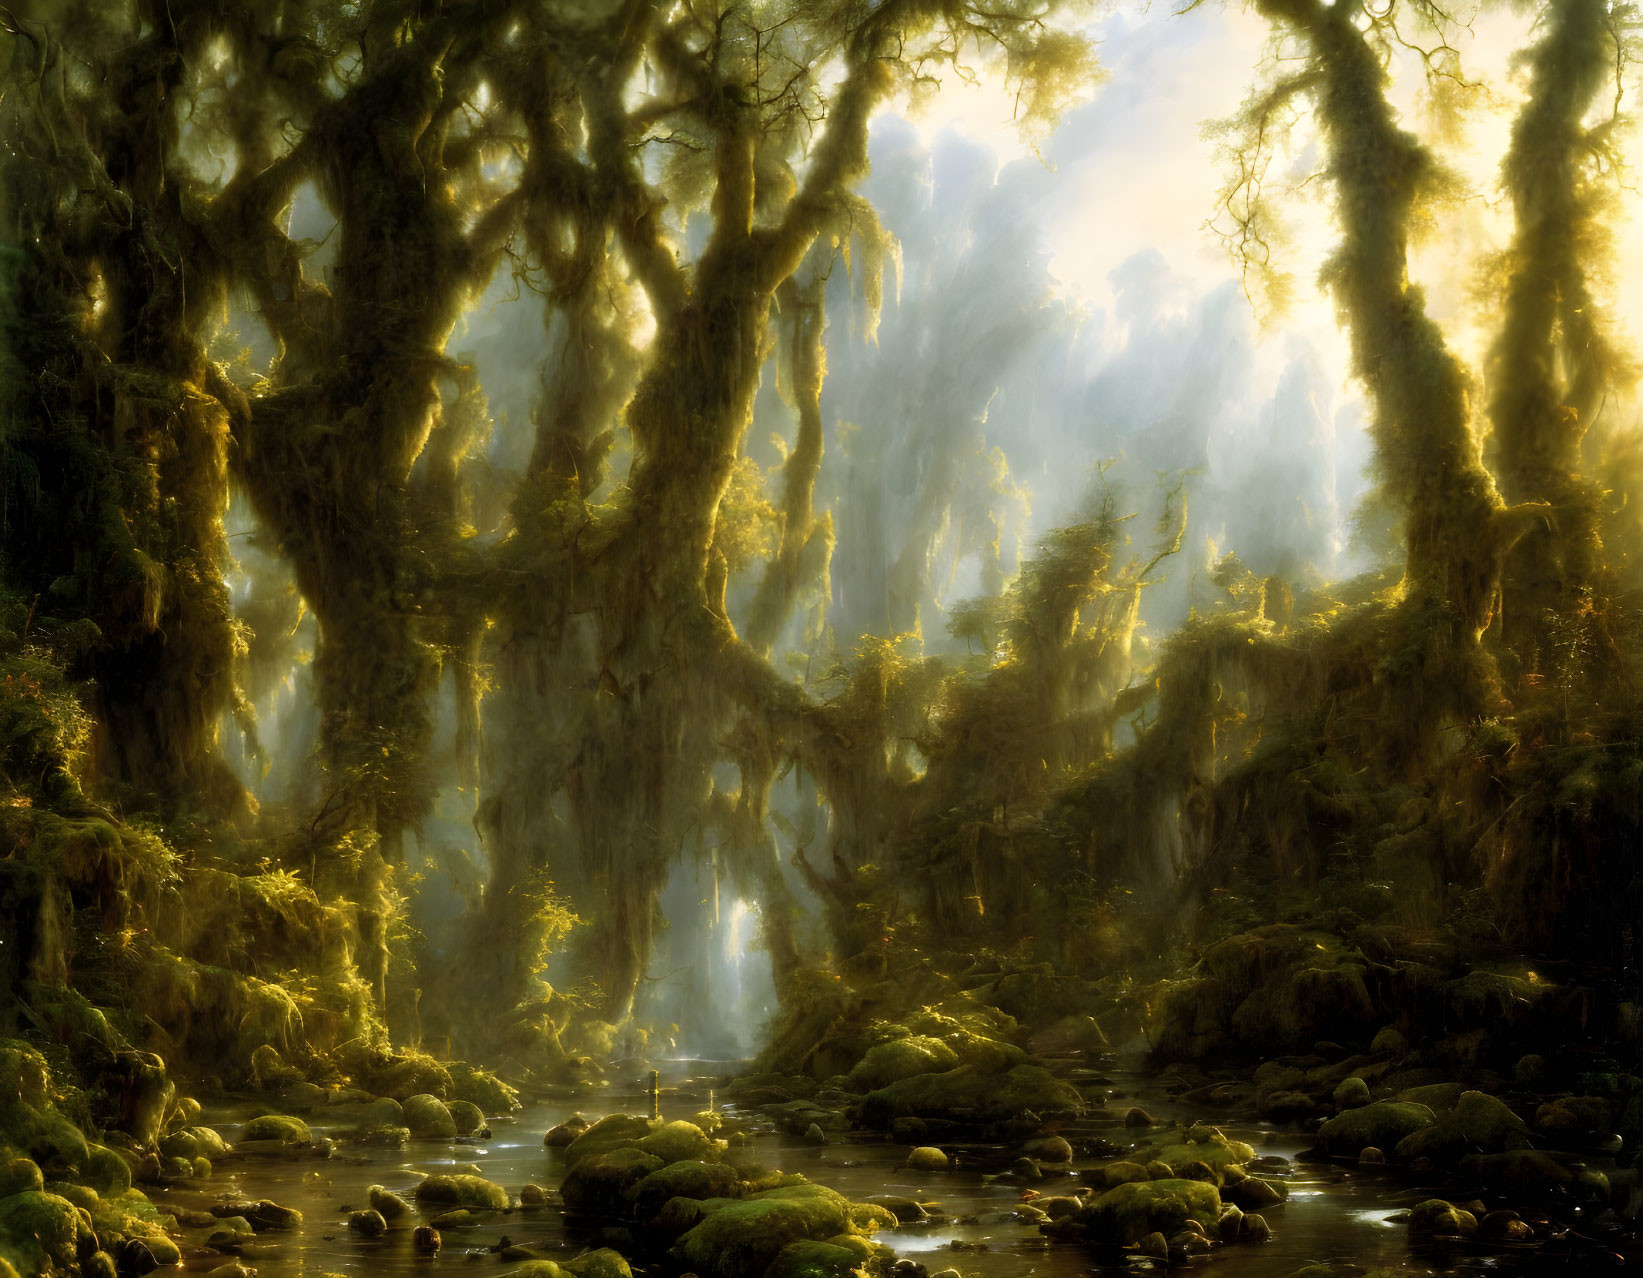 Misty forest with sunlight, stream, and lush greenery